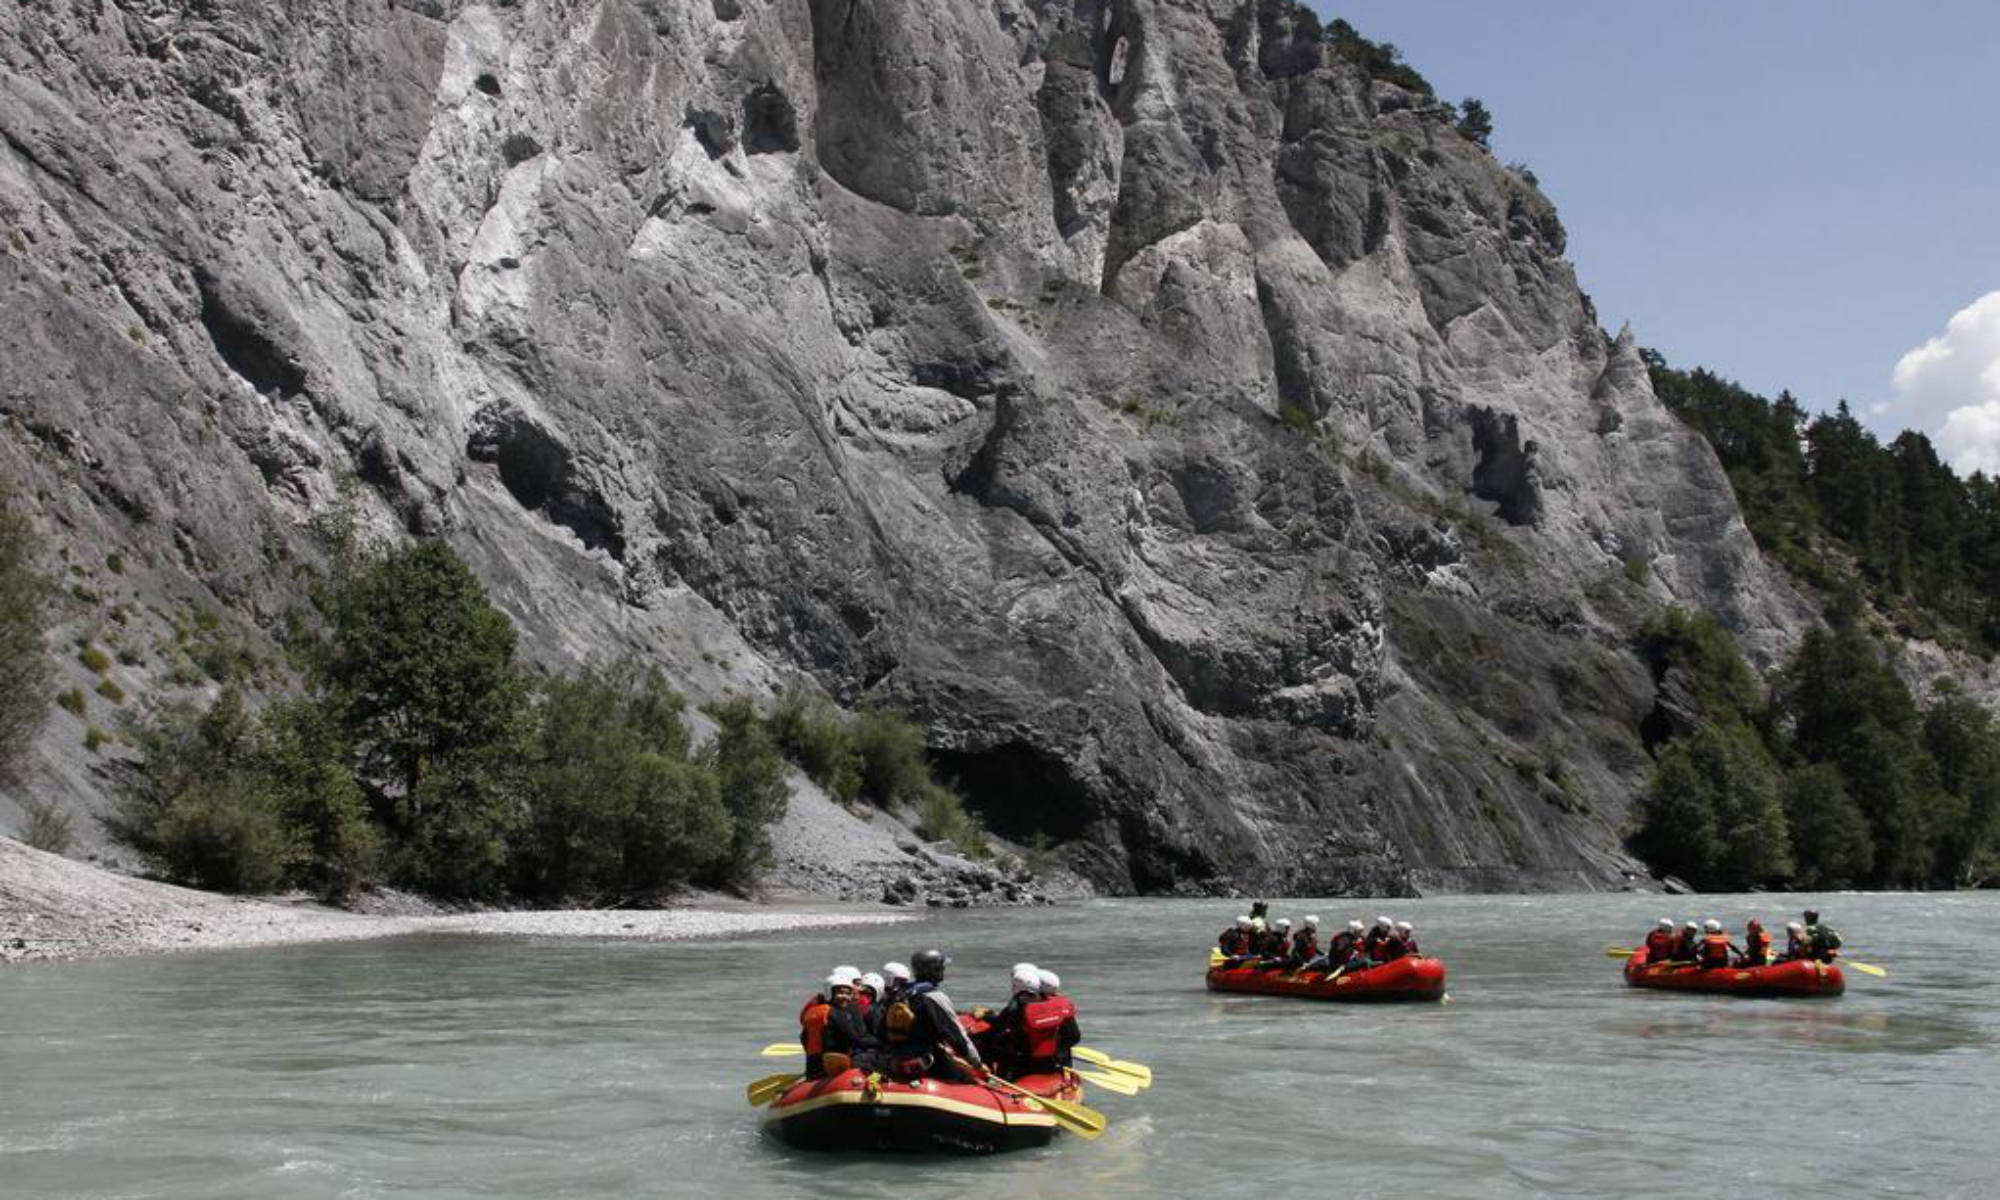 Several groups of people are white water rafting on the Vorderrhein in Switzerland.